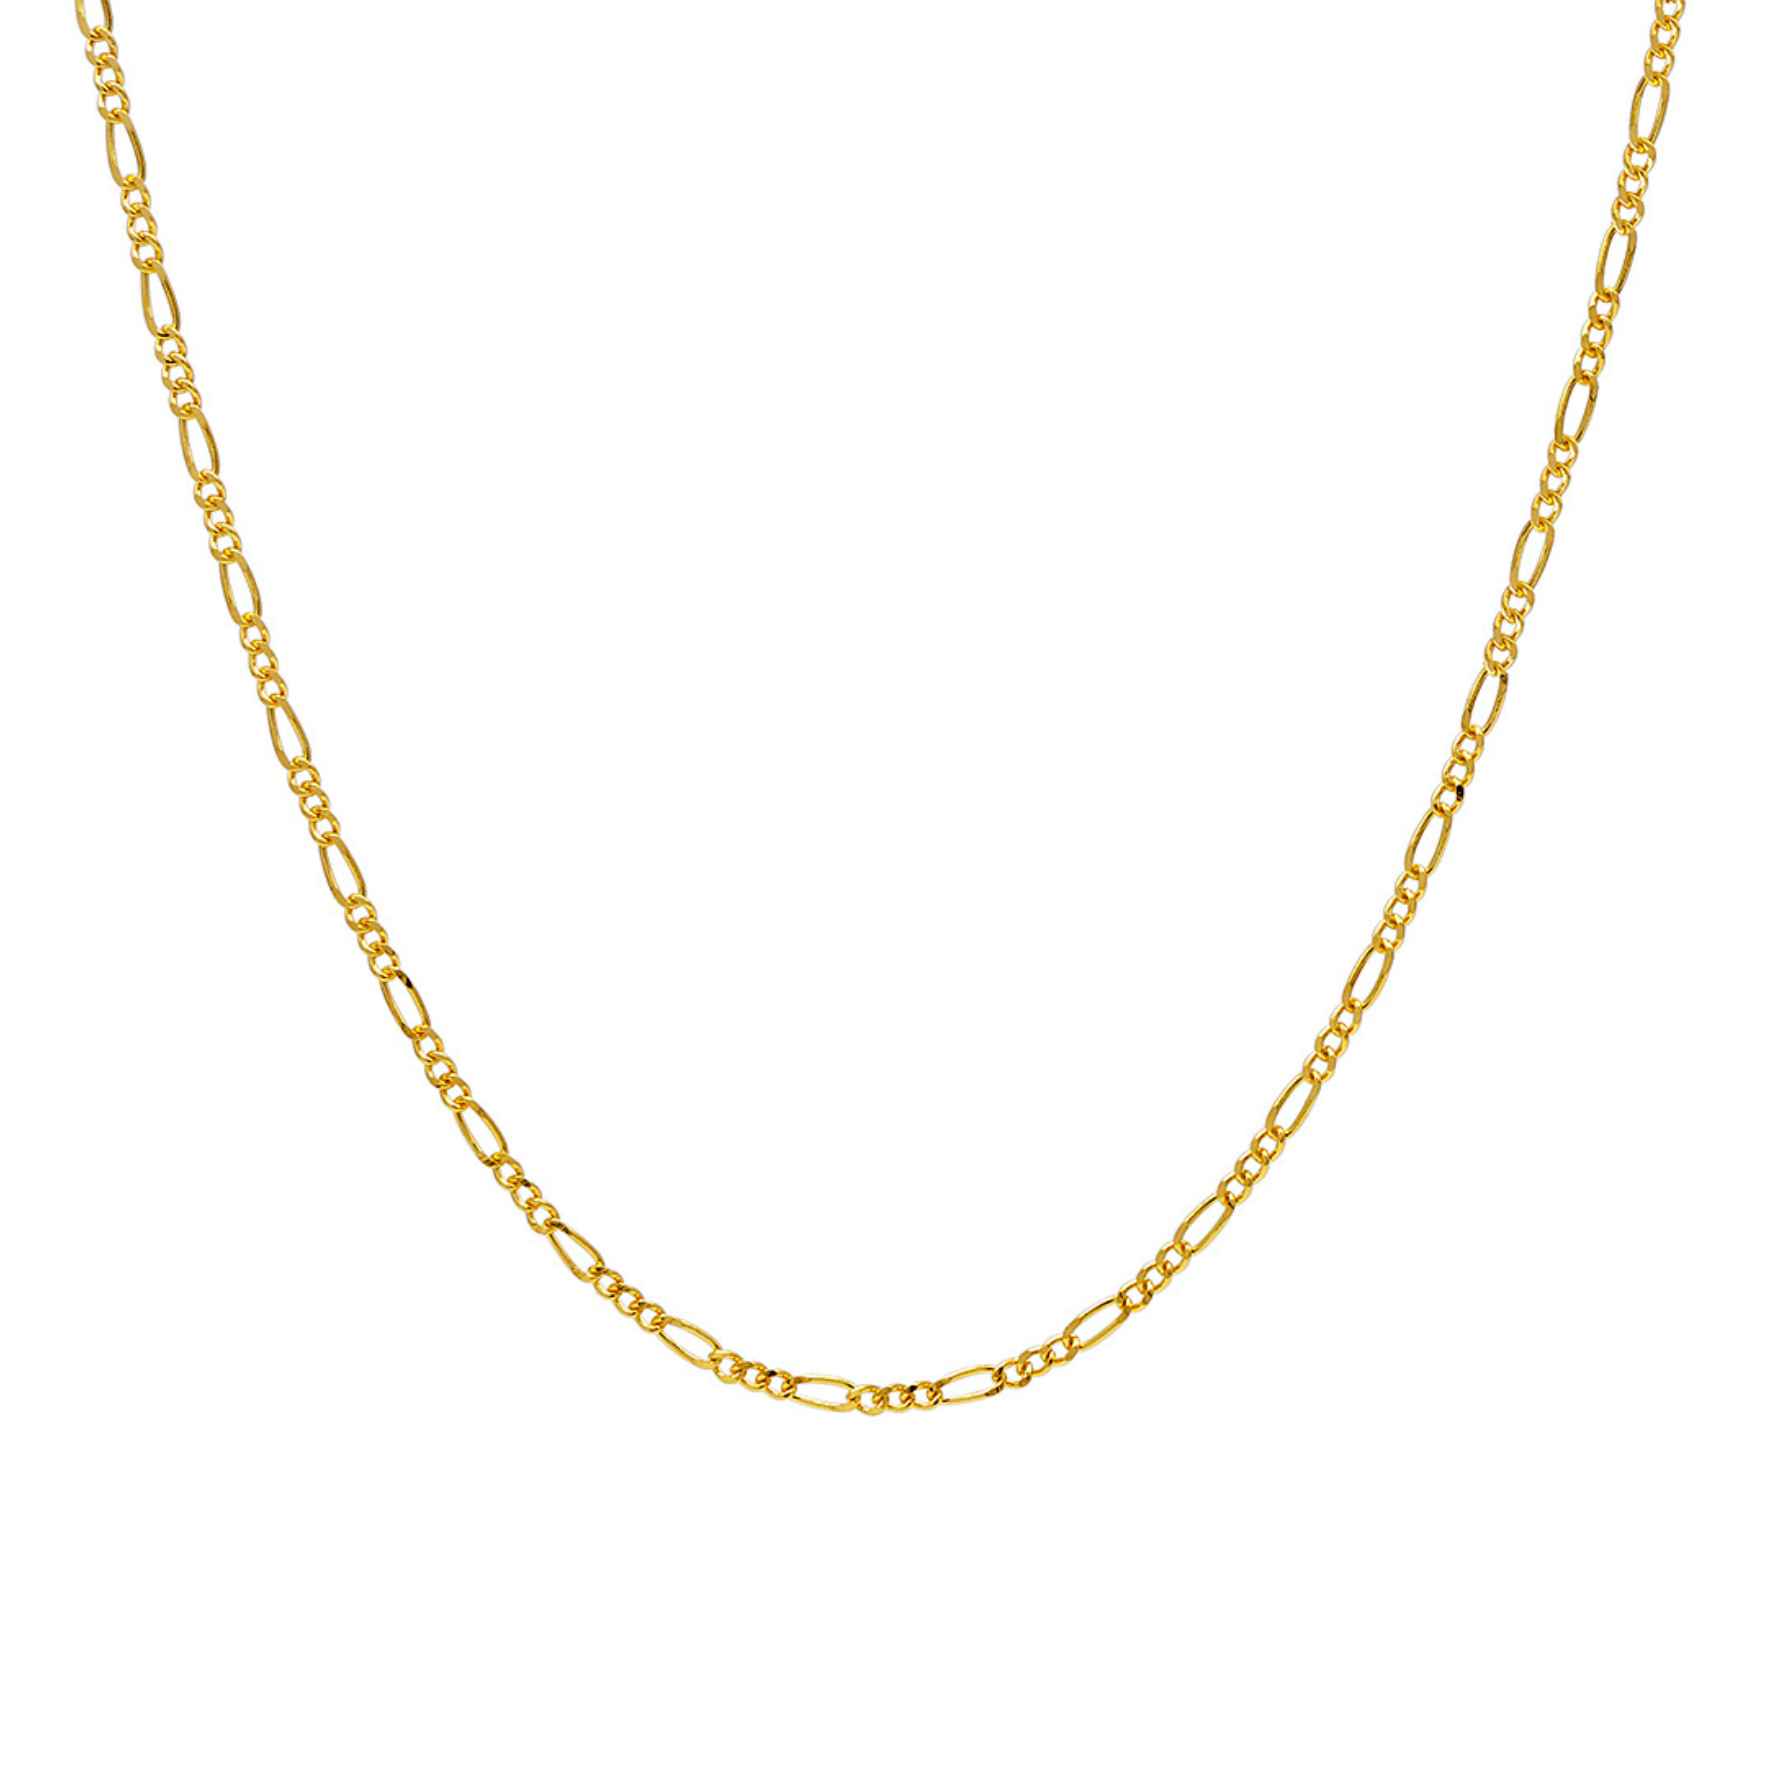 Frida Figaro Necklace from A-Hjort Jewellery in Goldplated Silver Sterling 925